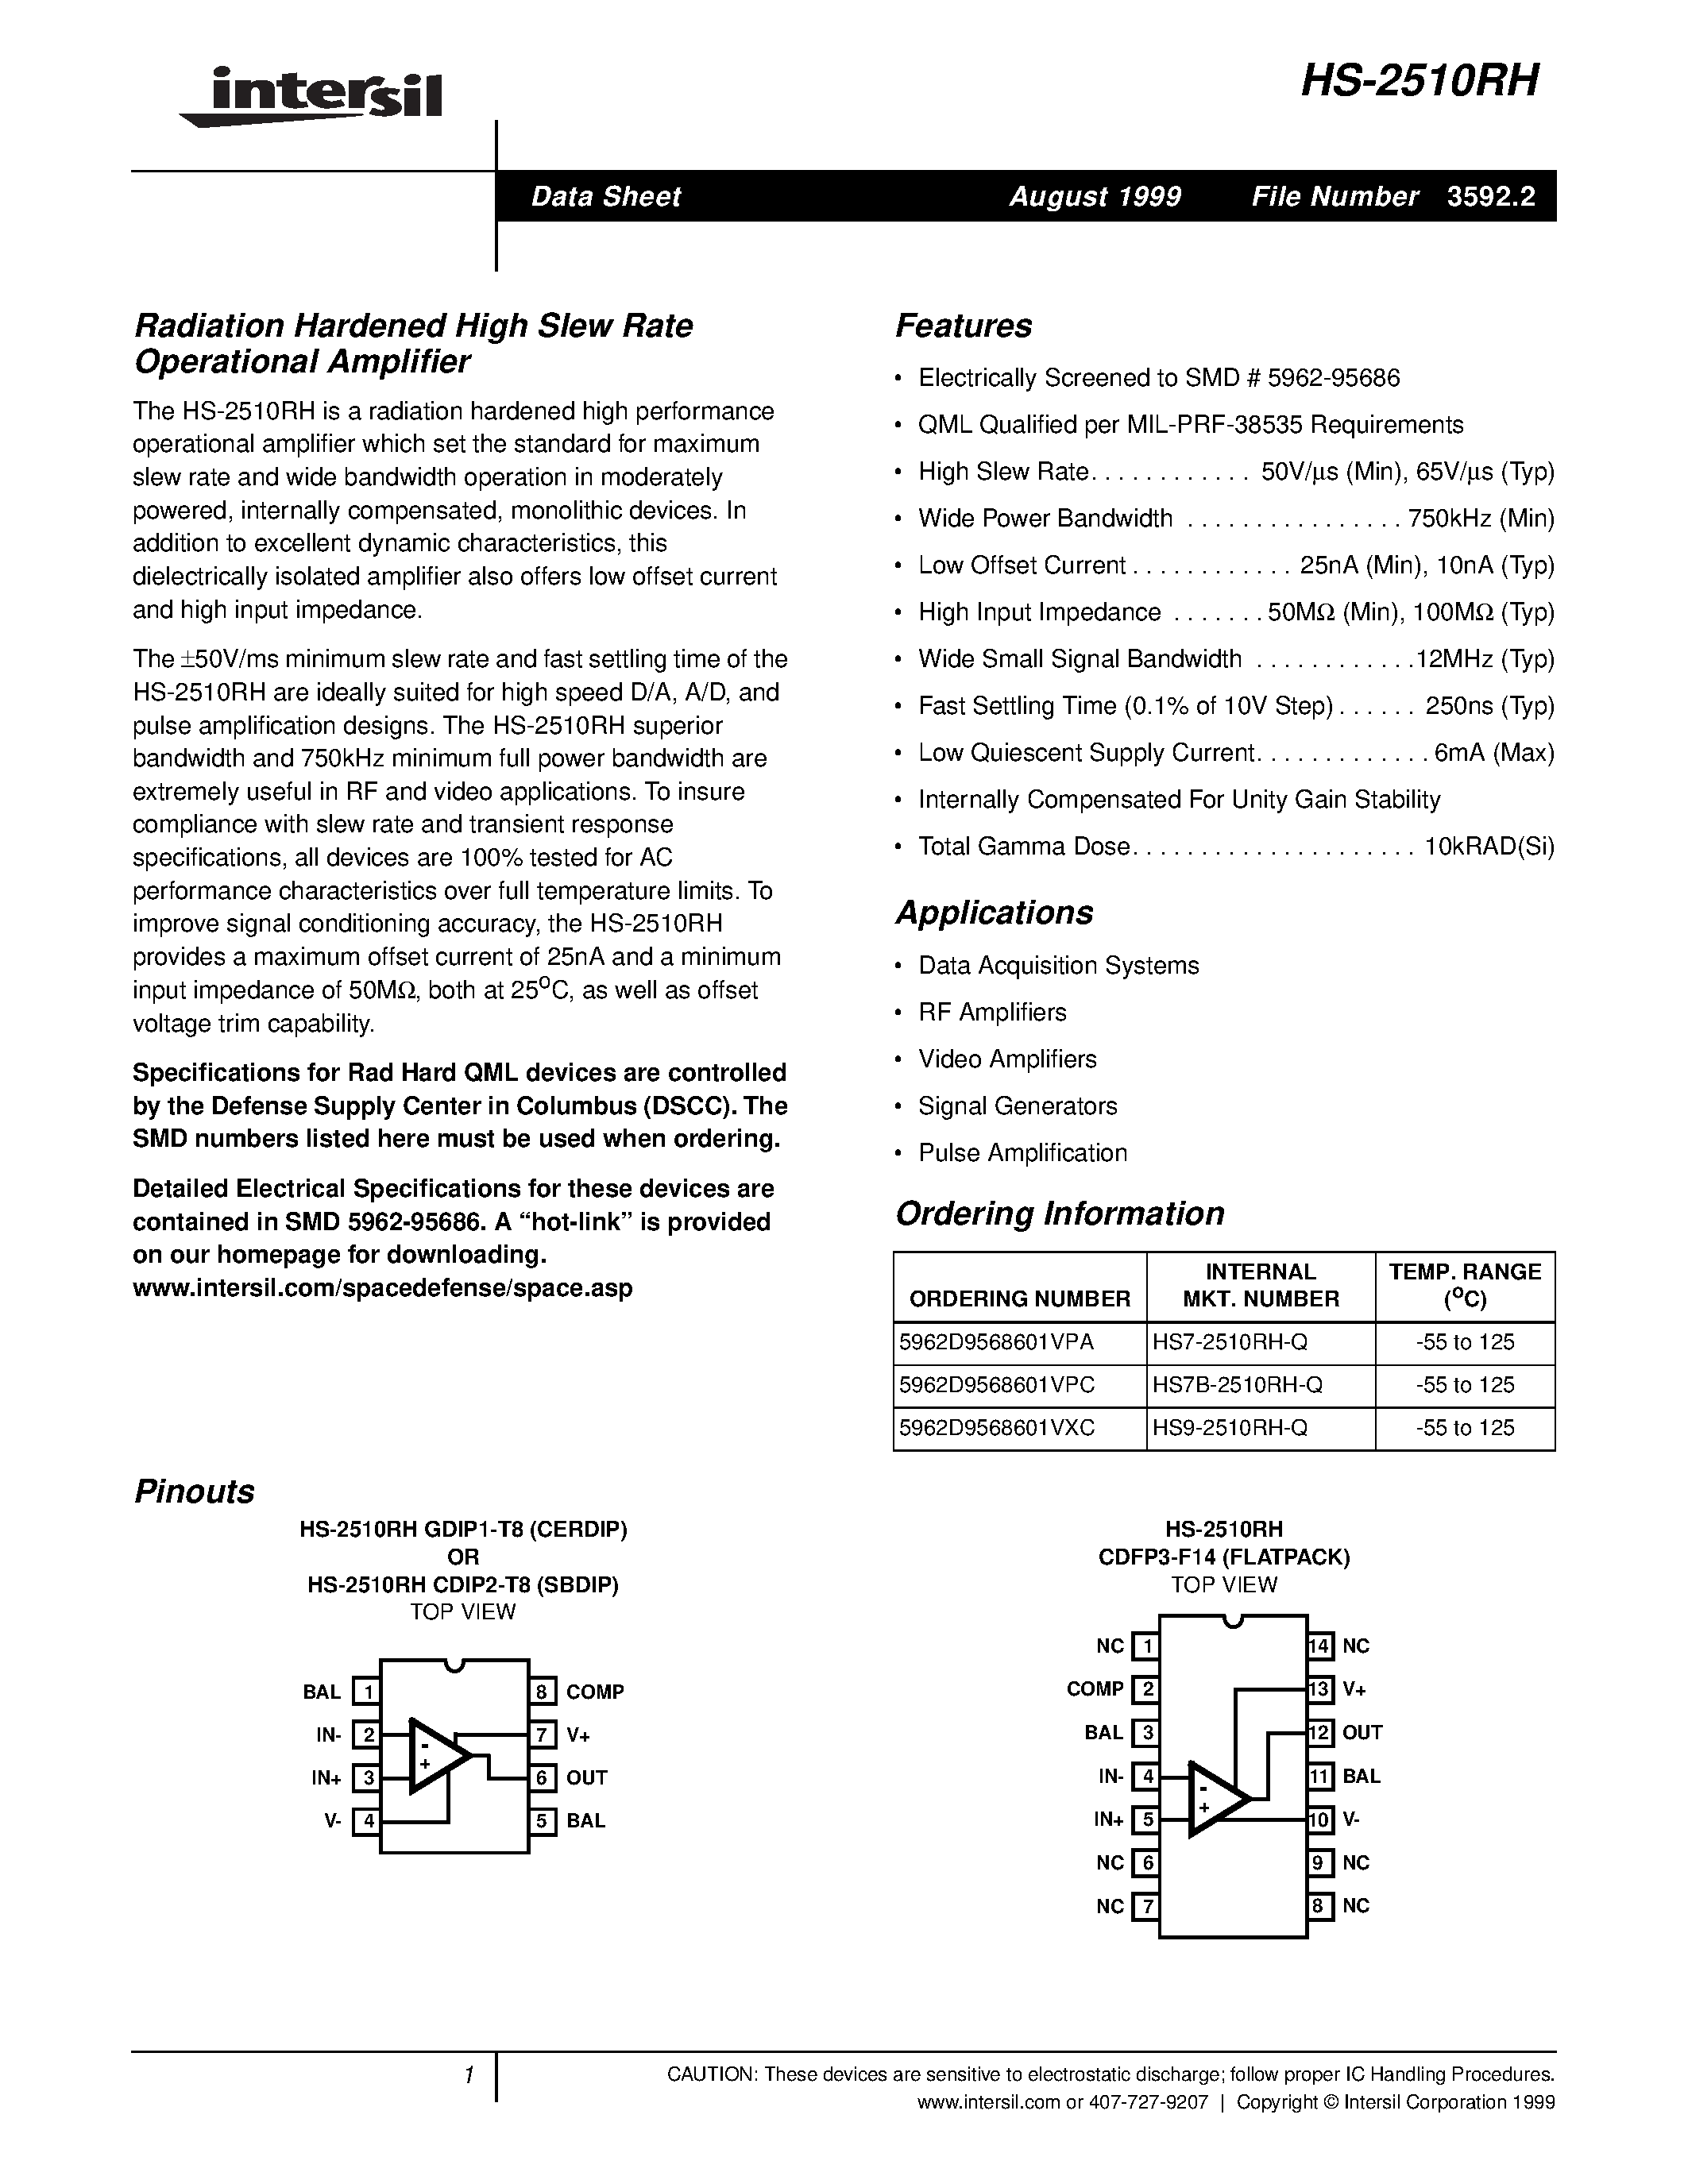 Datasheet HS9-2510RH-Q - Radiation Hardened High Slew Rate Operational Amplifier page 1